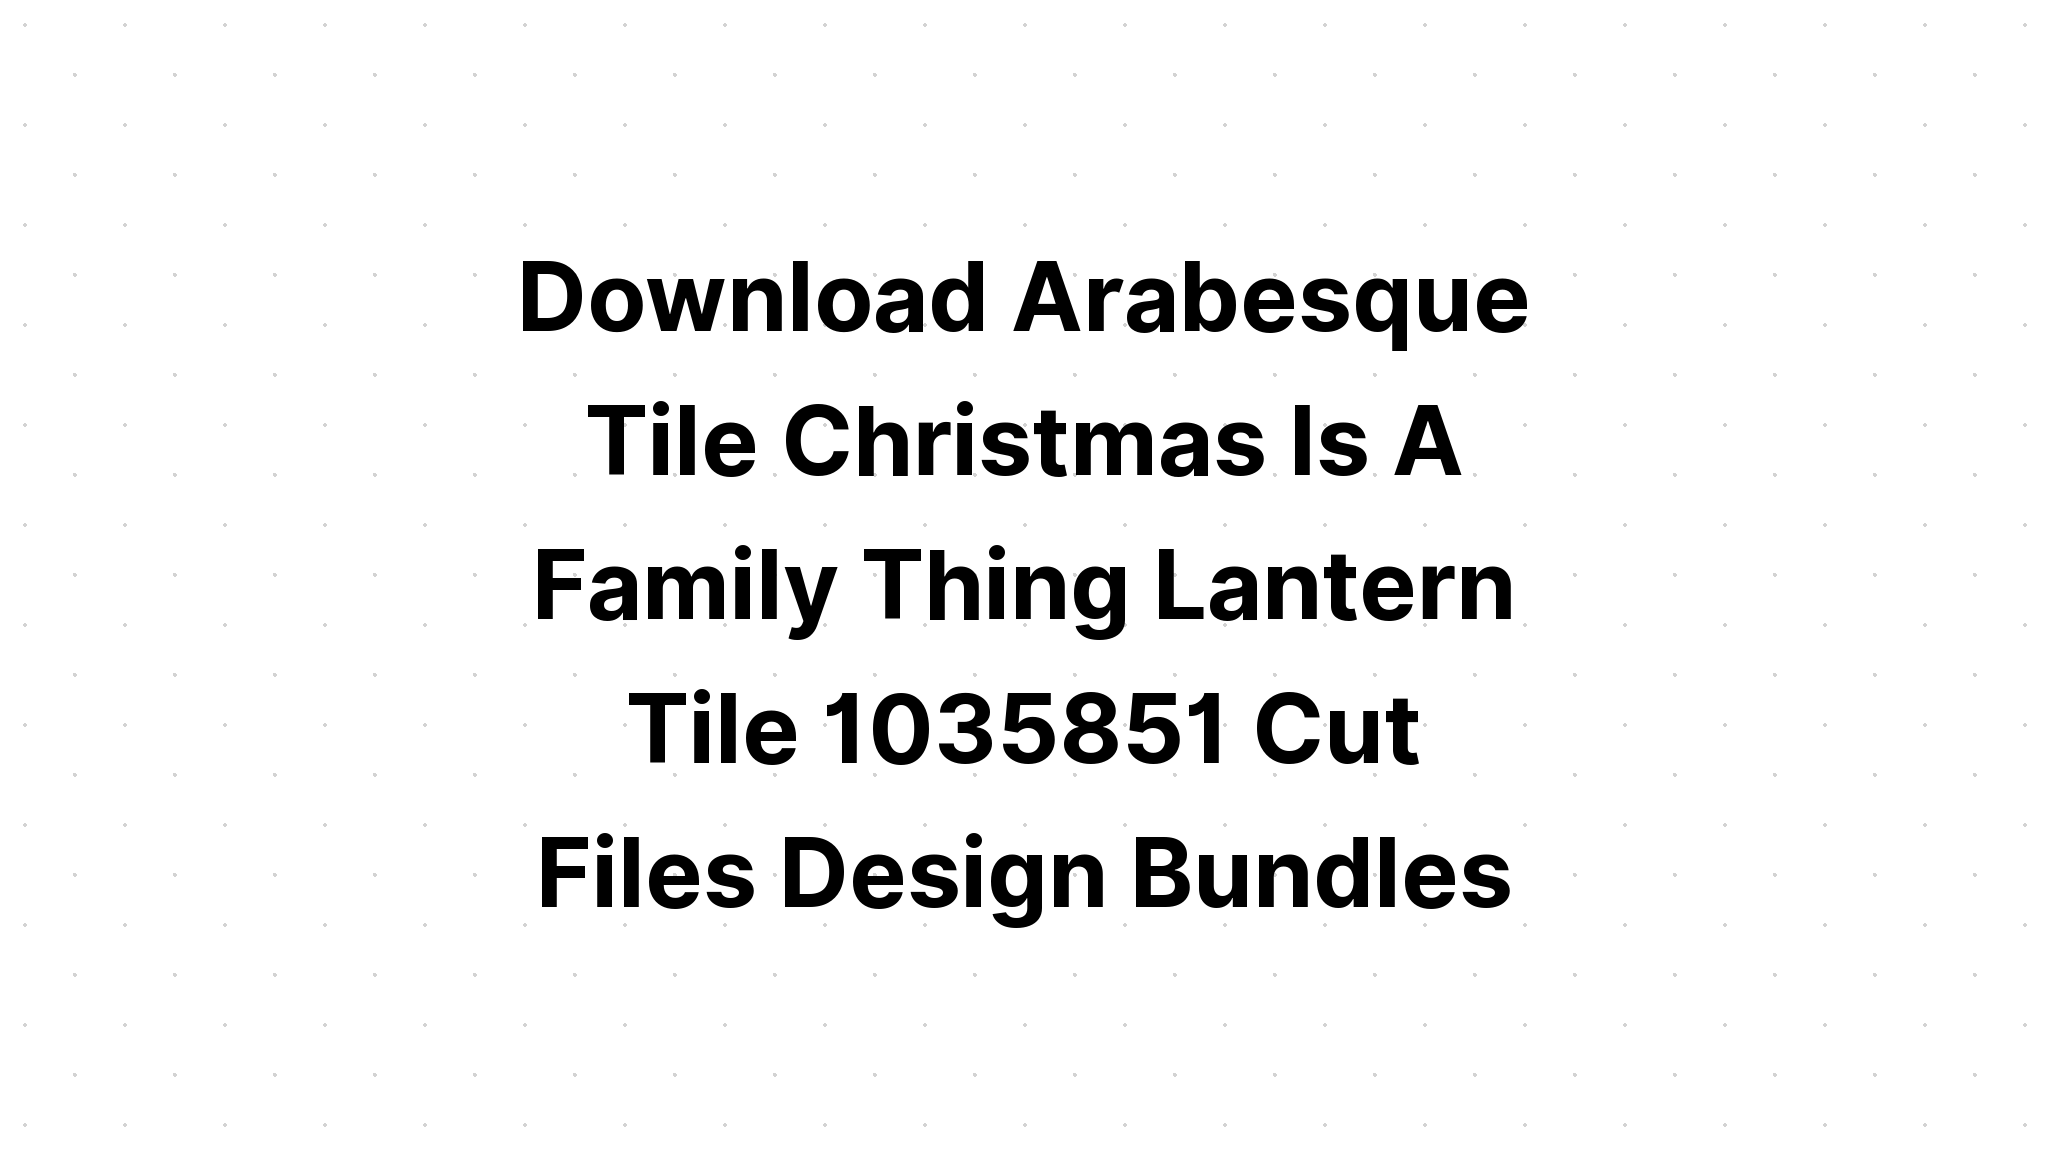 Download Arabesque Christmas Ornament For Family' SVG File